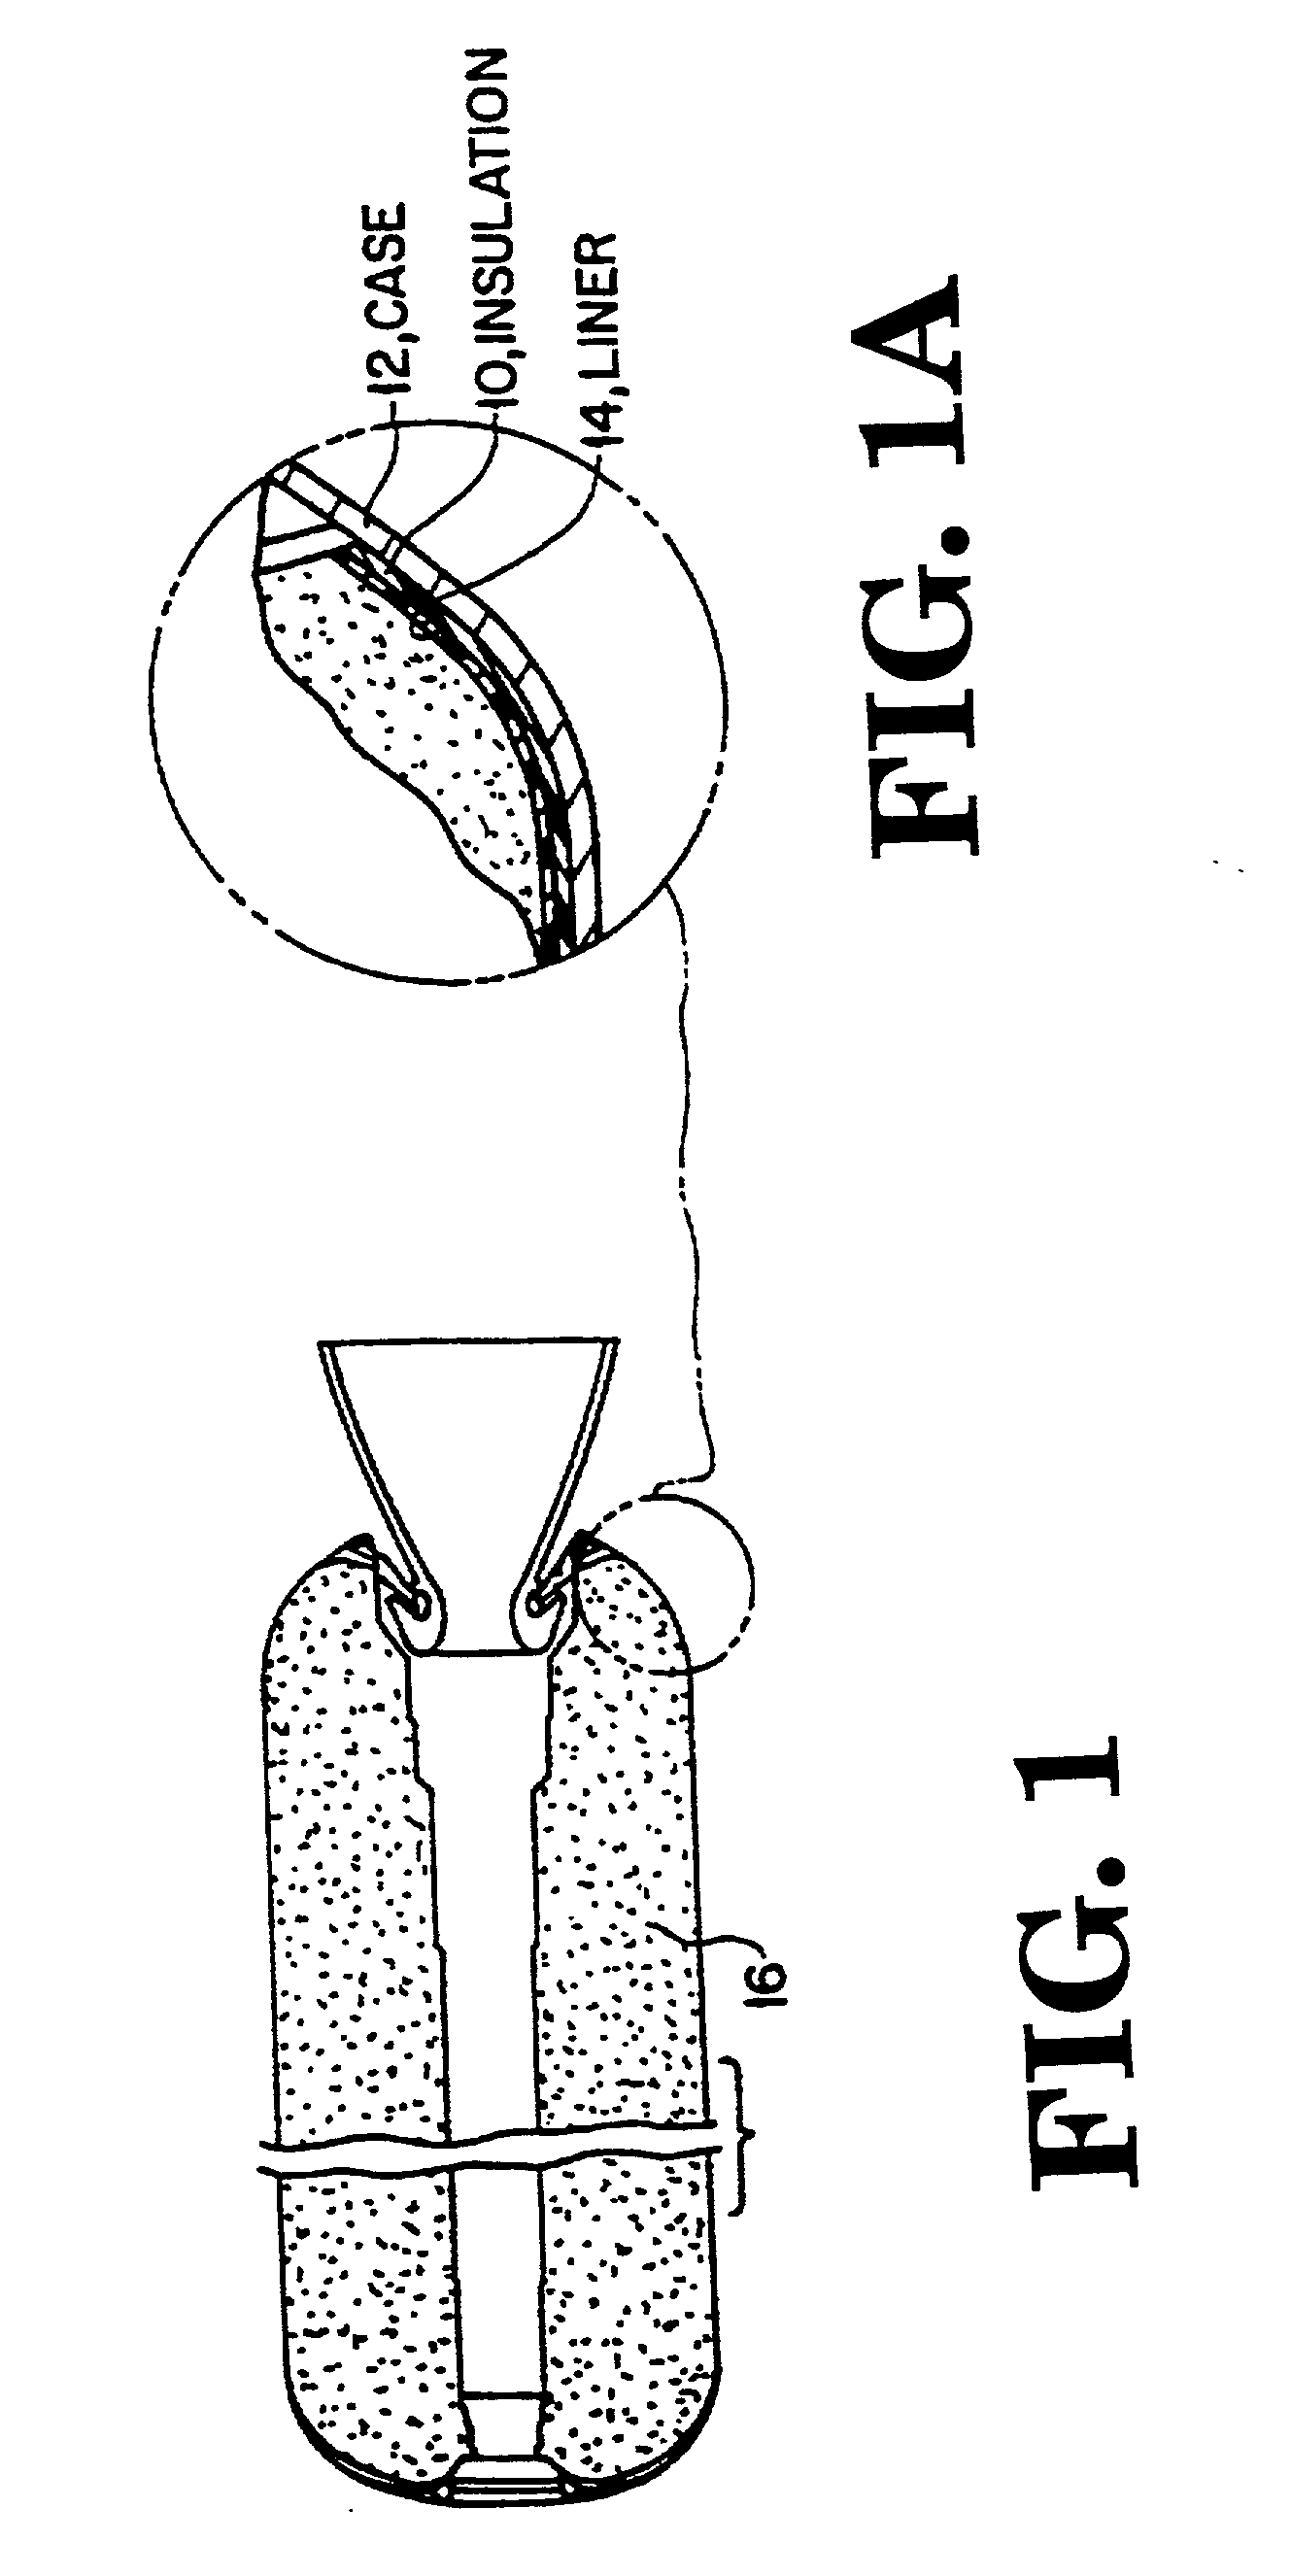 Rocket assembly ablative materials, and method for insulating or thermally protecting a rocket assembly